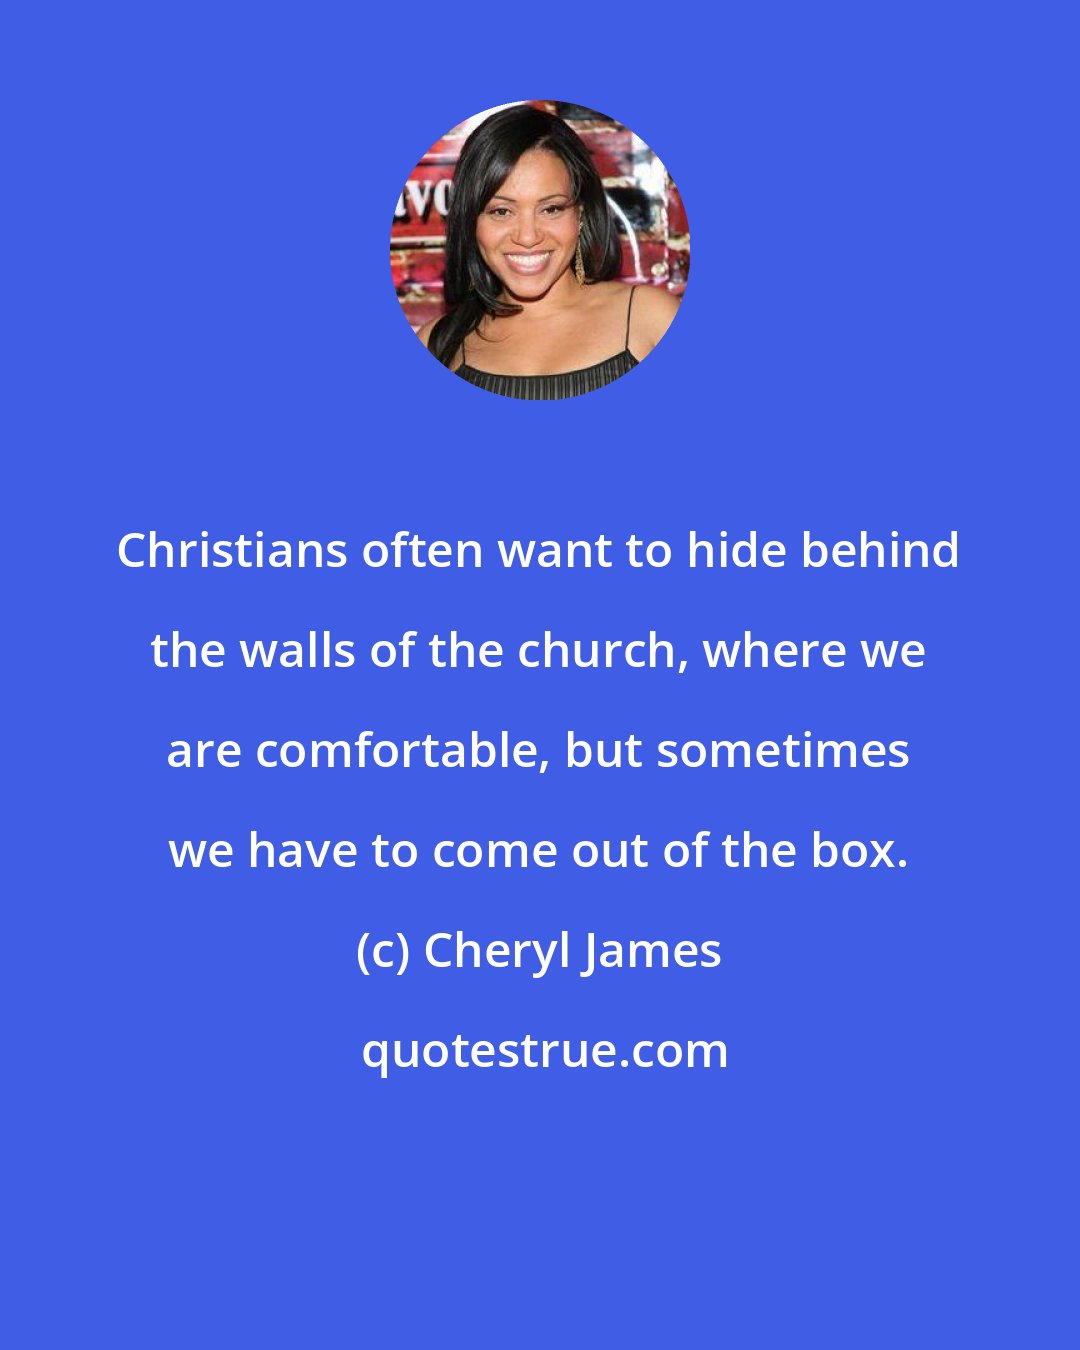 Cheryl James: Christians often want to hide behind the walls of the church, where we are comfortable, but sometimes we have to come out of the box.